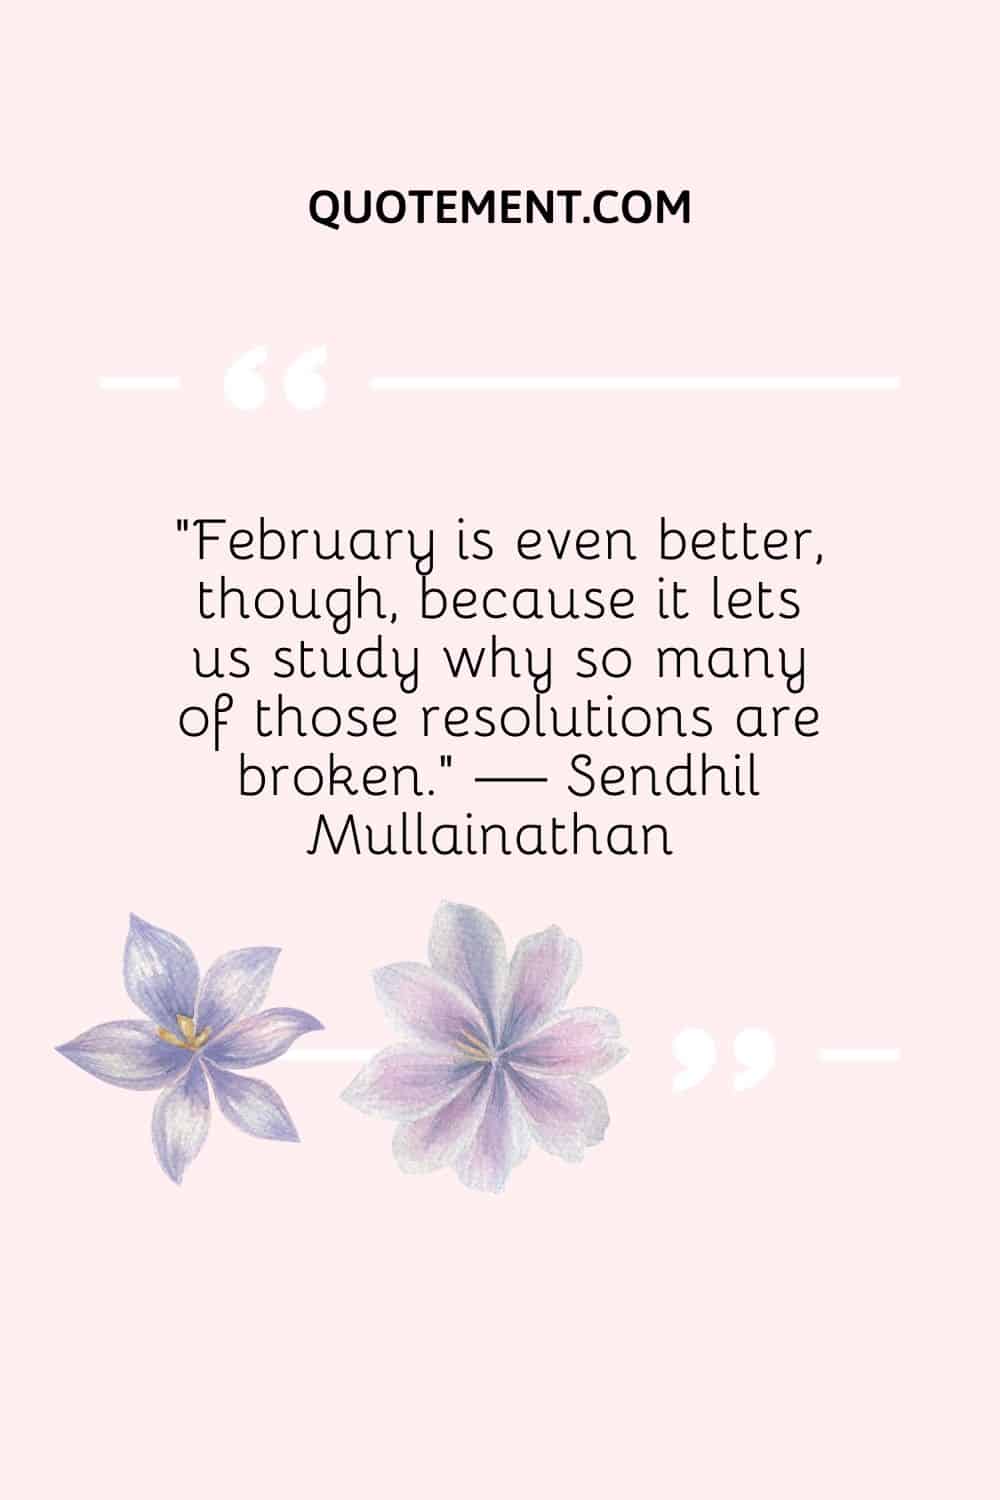 “February is even better, though, because it lets us study why so many of those resolutions are broken.” — Sendhil Mullainathan